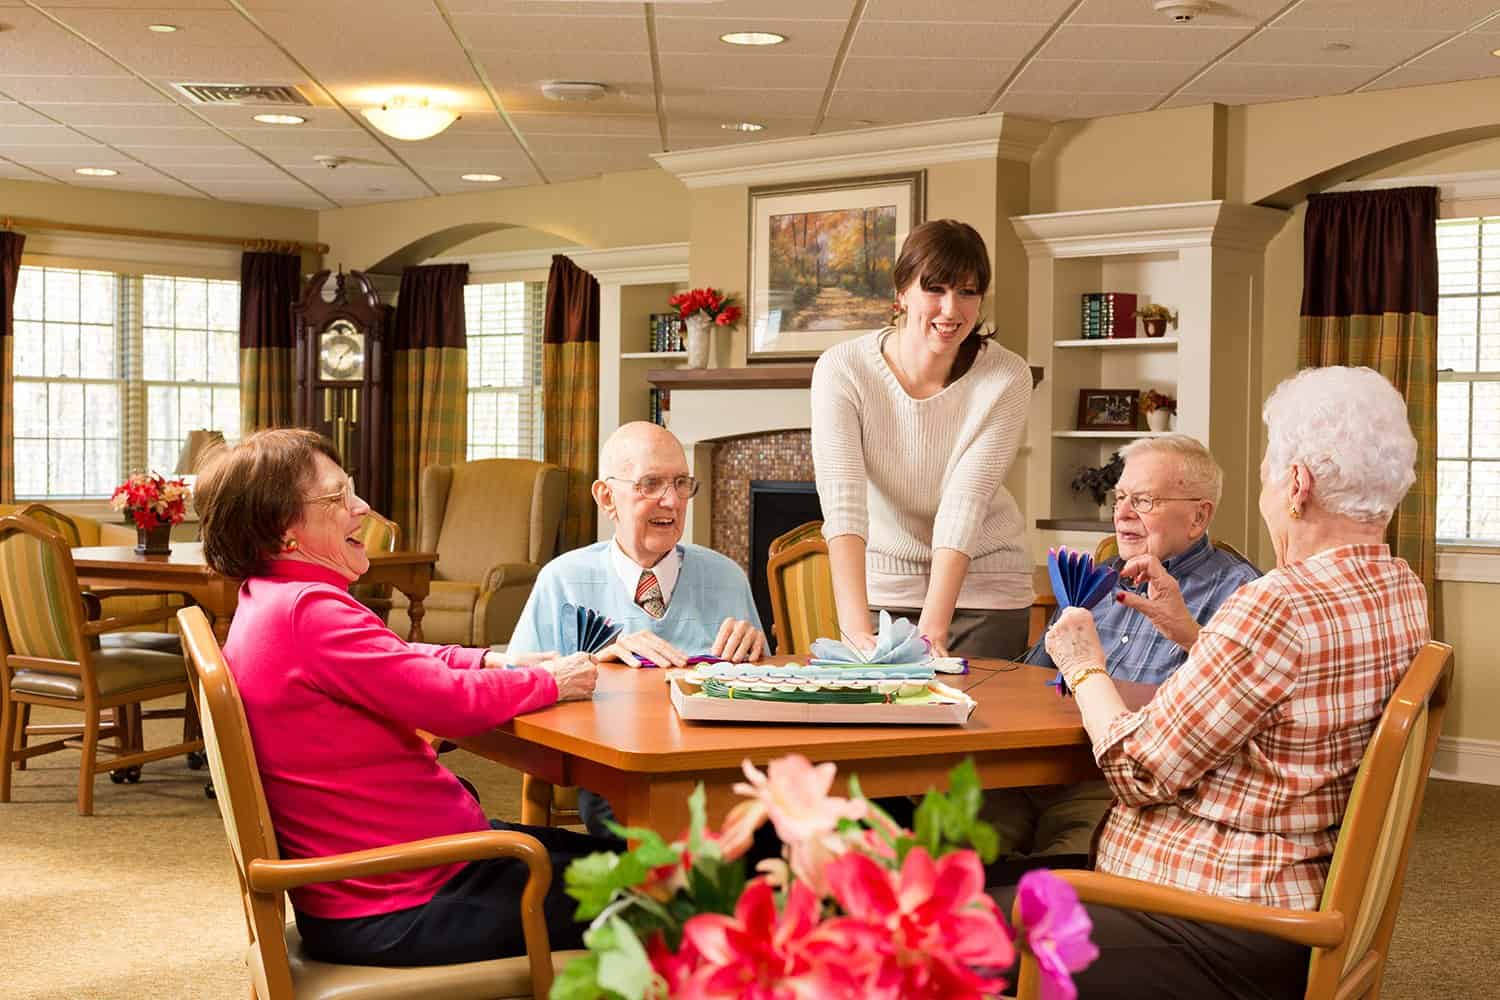 residents and staff chatting together in the dining area